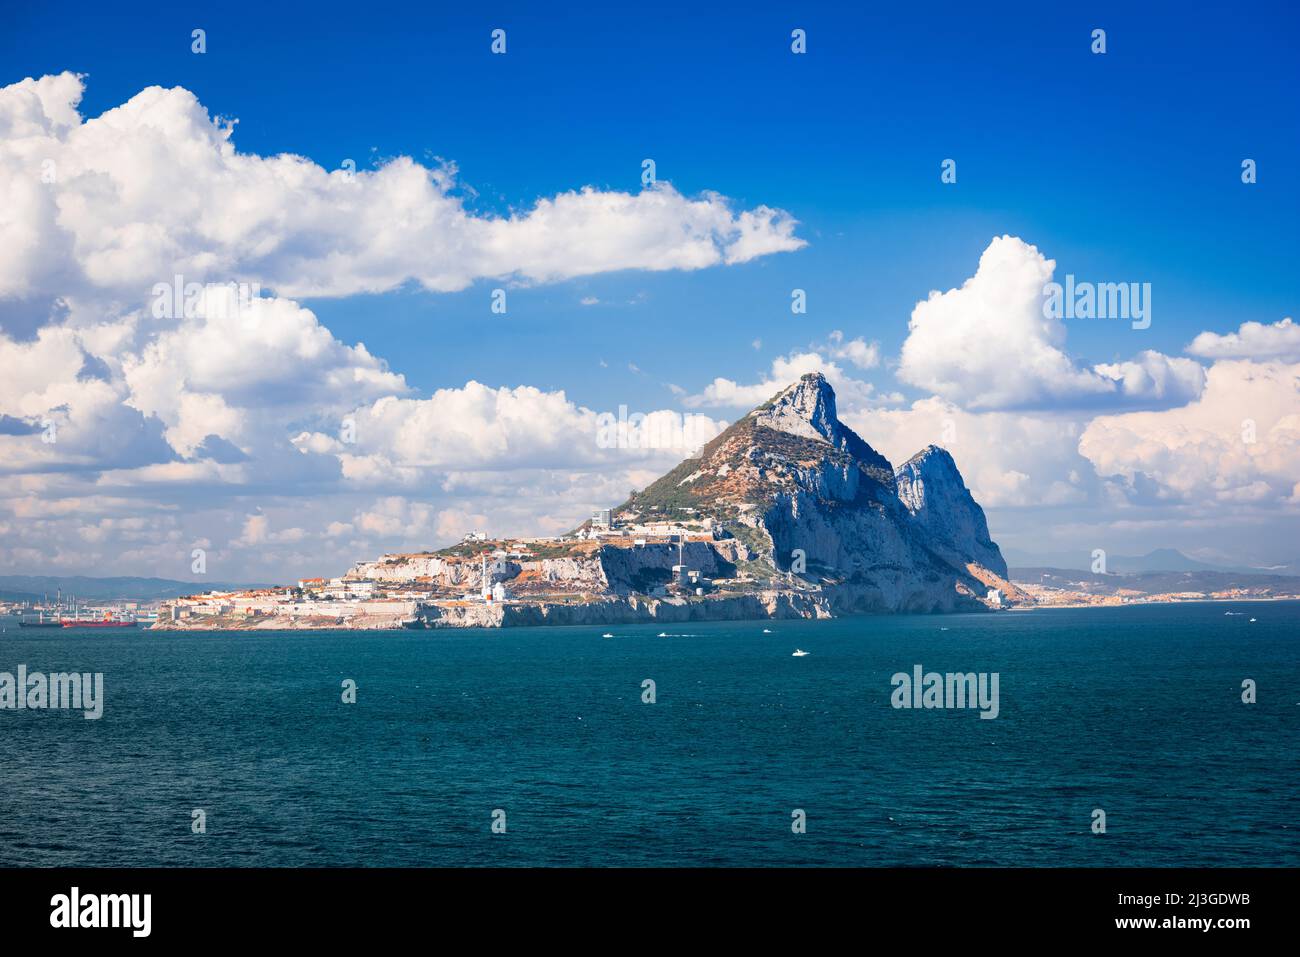 The Rock of Gibraltar,  a British Overseas Territory located at the southern tip of the Iberian Peninsula. Stock Photo